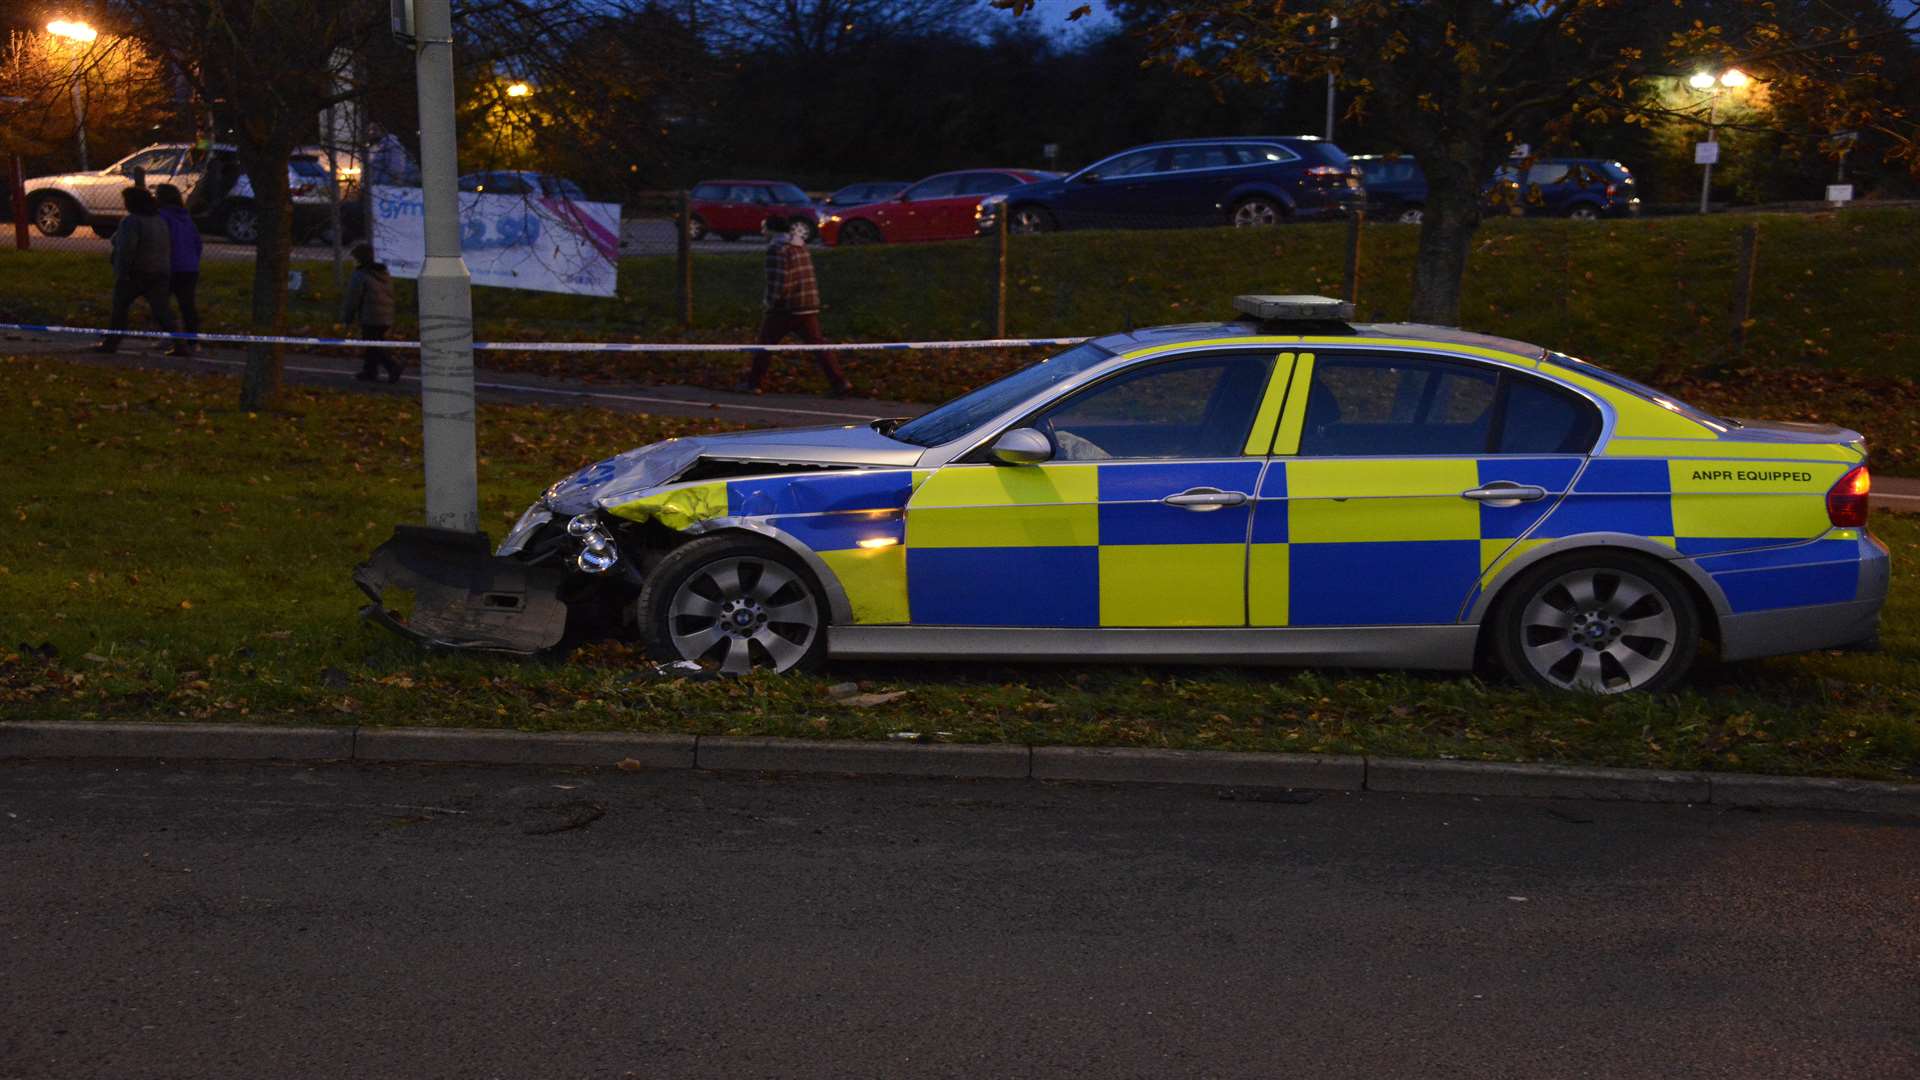 The police car that hit a lamppost after a chase through Ashford. Picture: Paul Amos